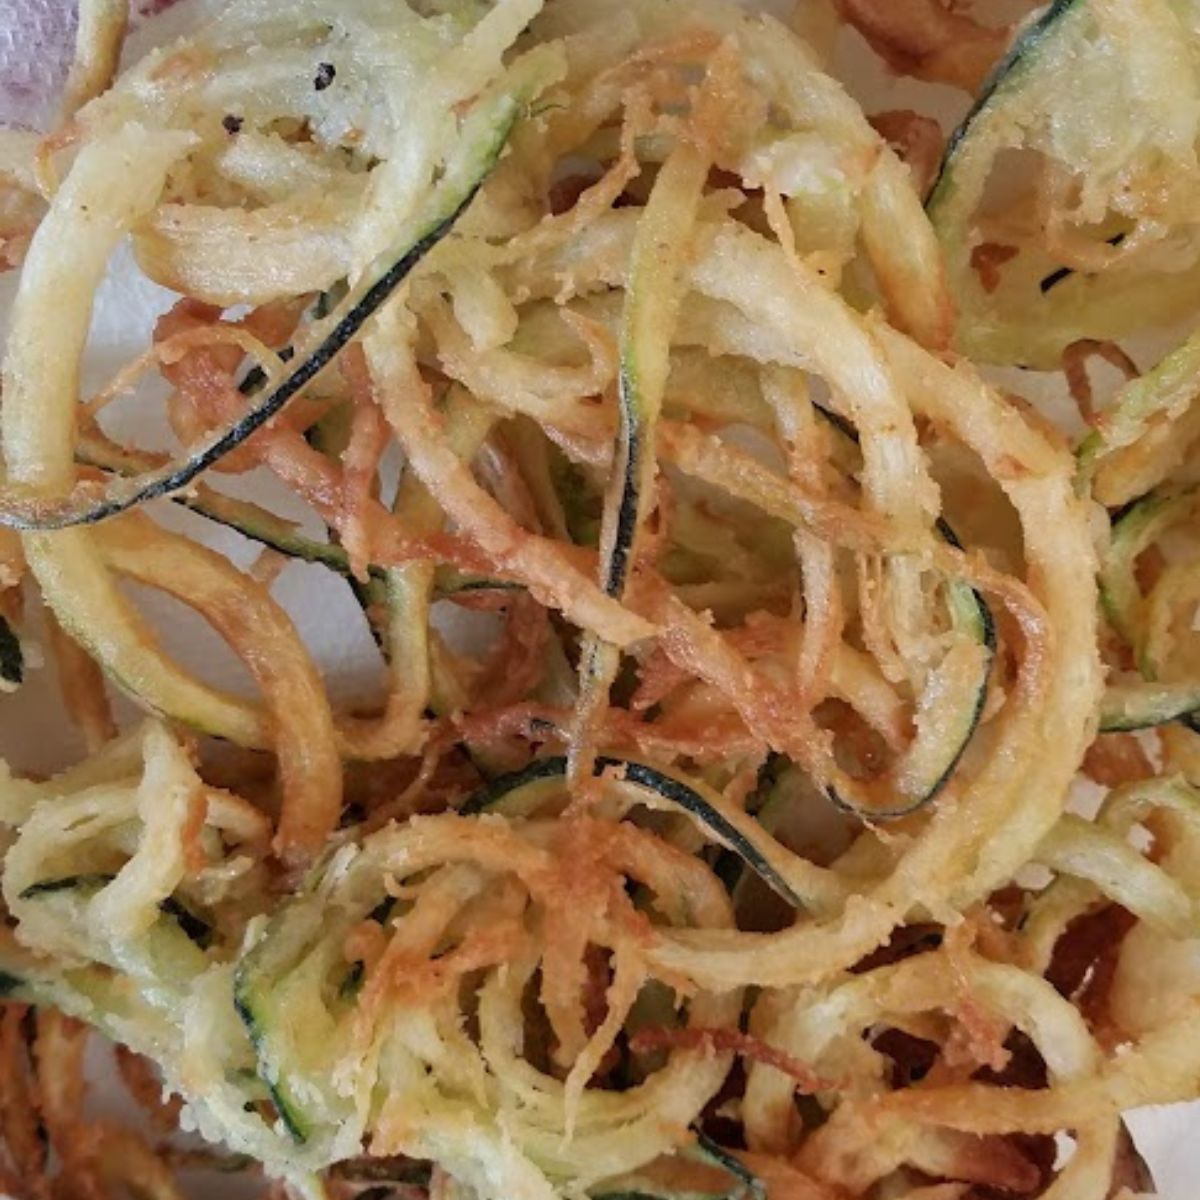 fried zoodles on a napkin